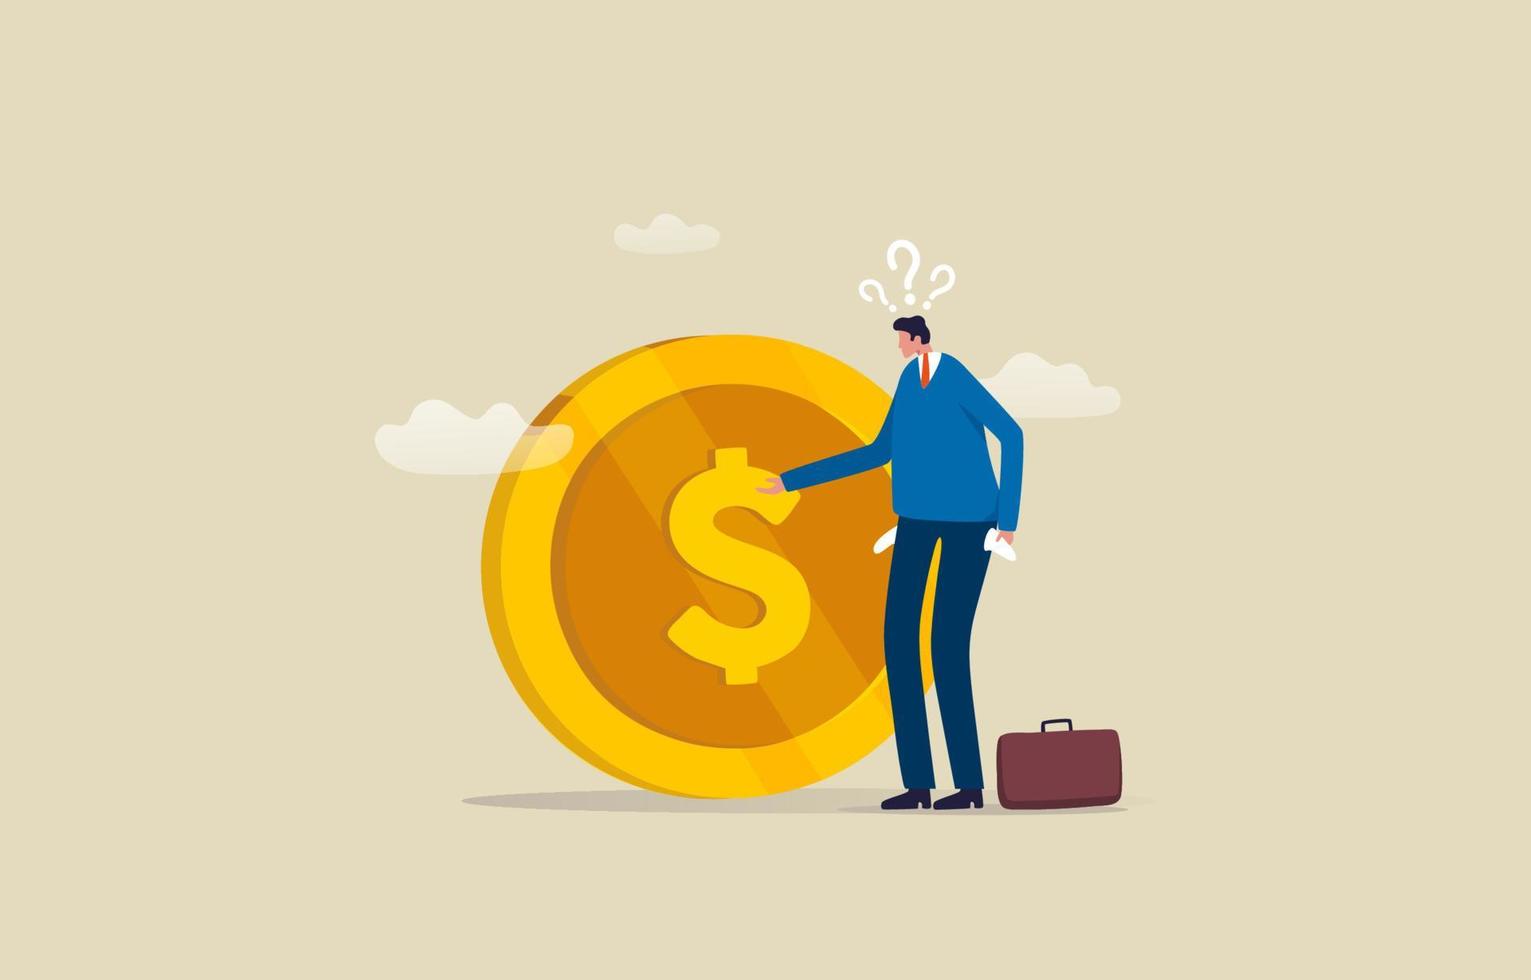 Financial questions. experiencing financial problems or investment problems. Frustrated man near huge coin thinking of financial problems. illustration vector